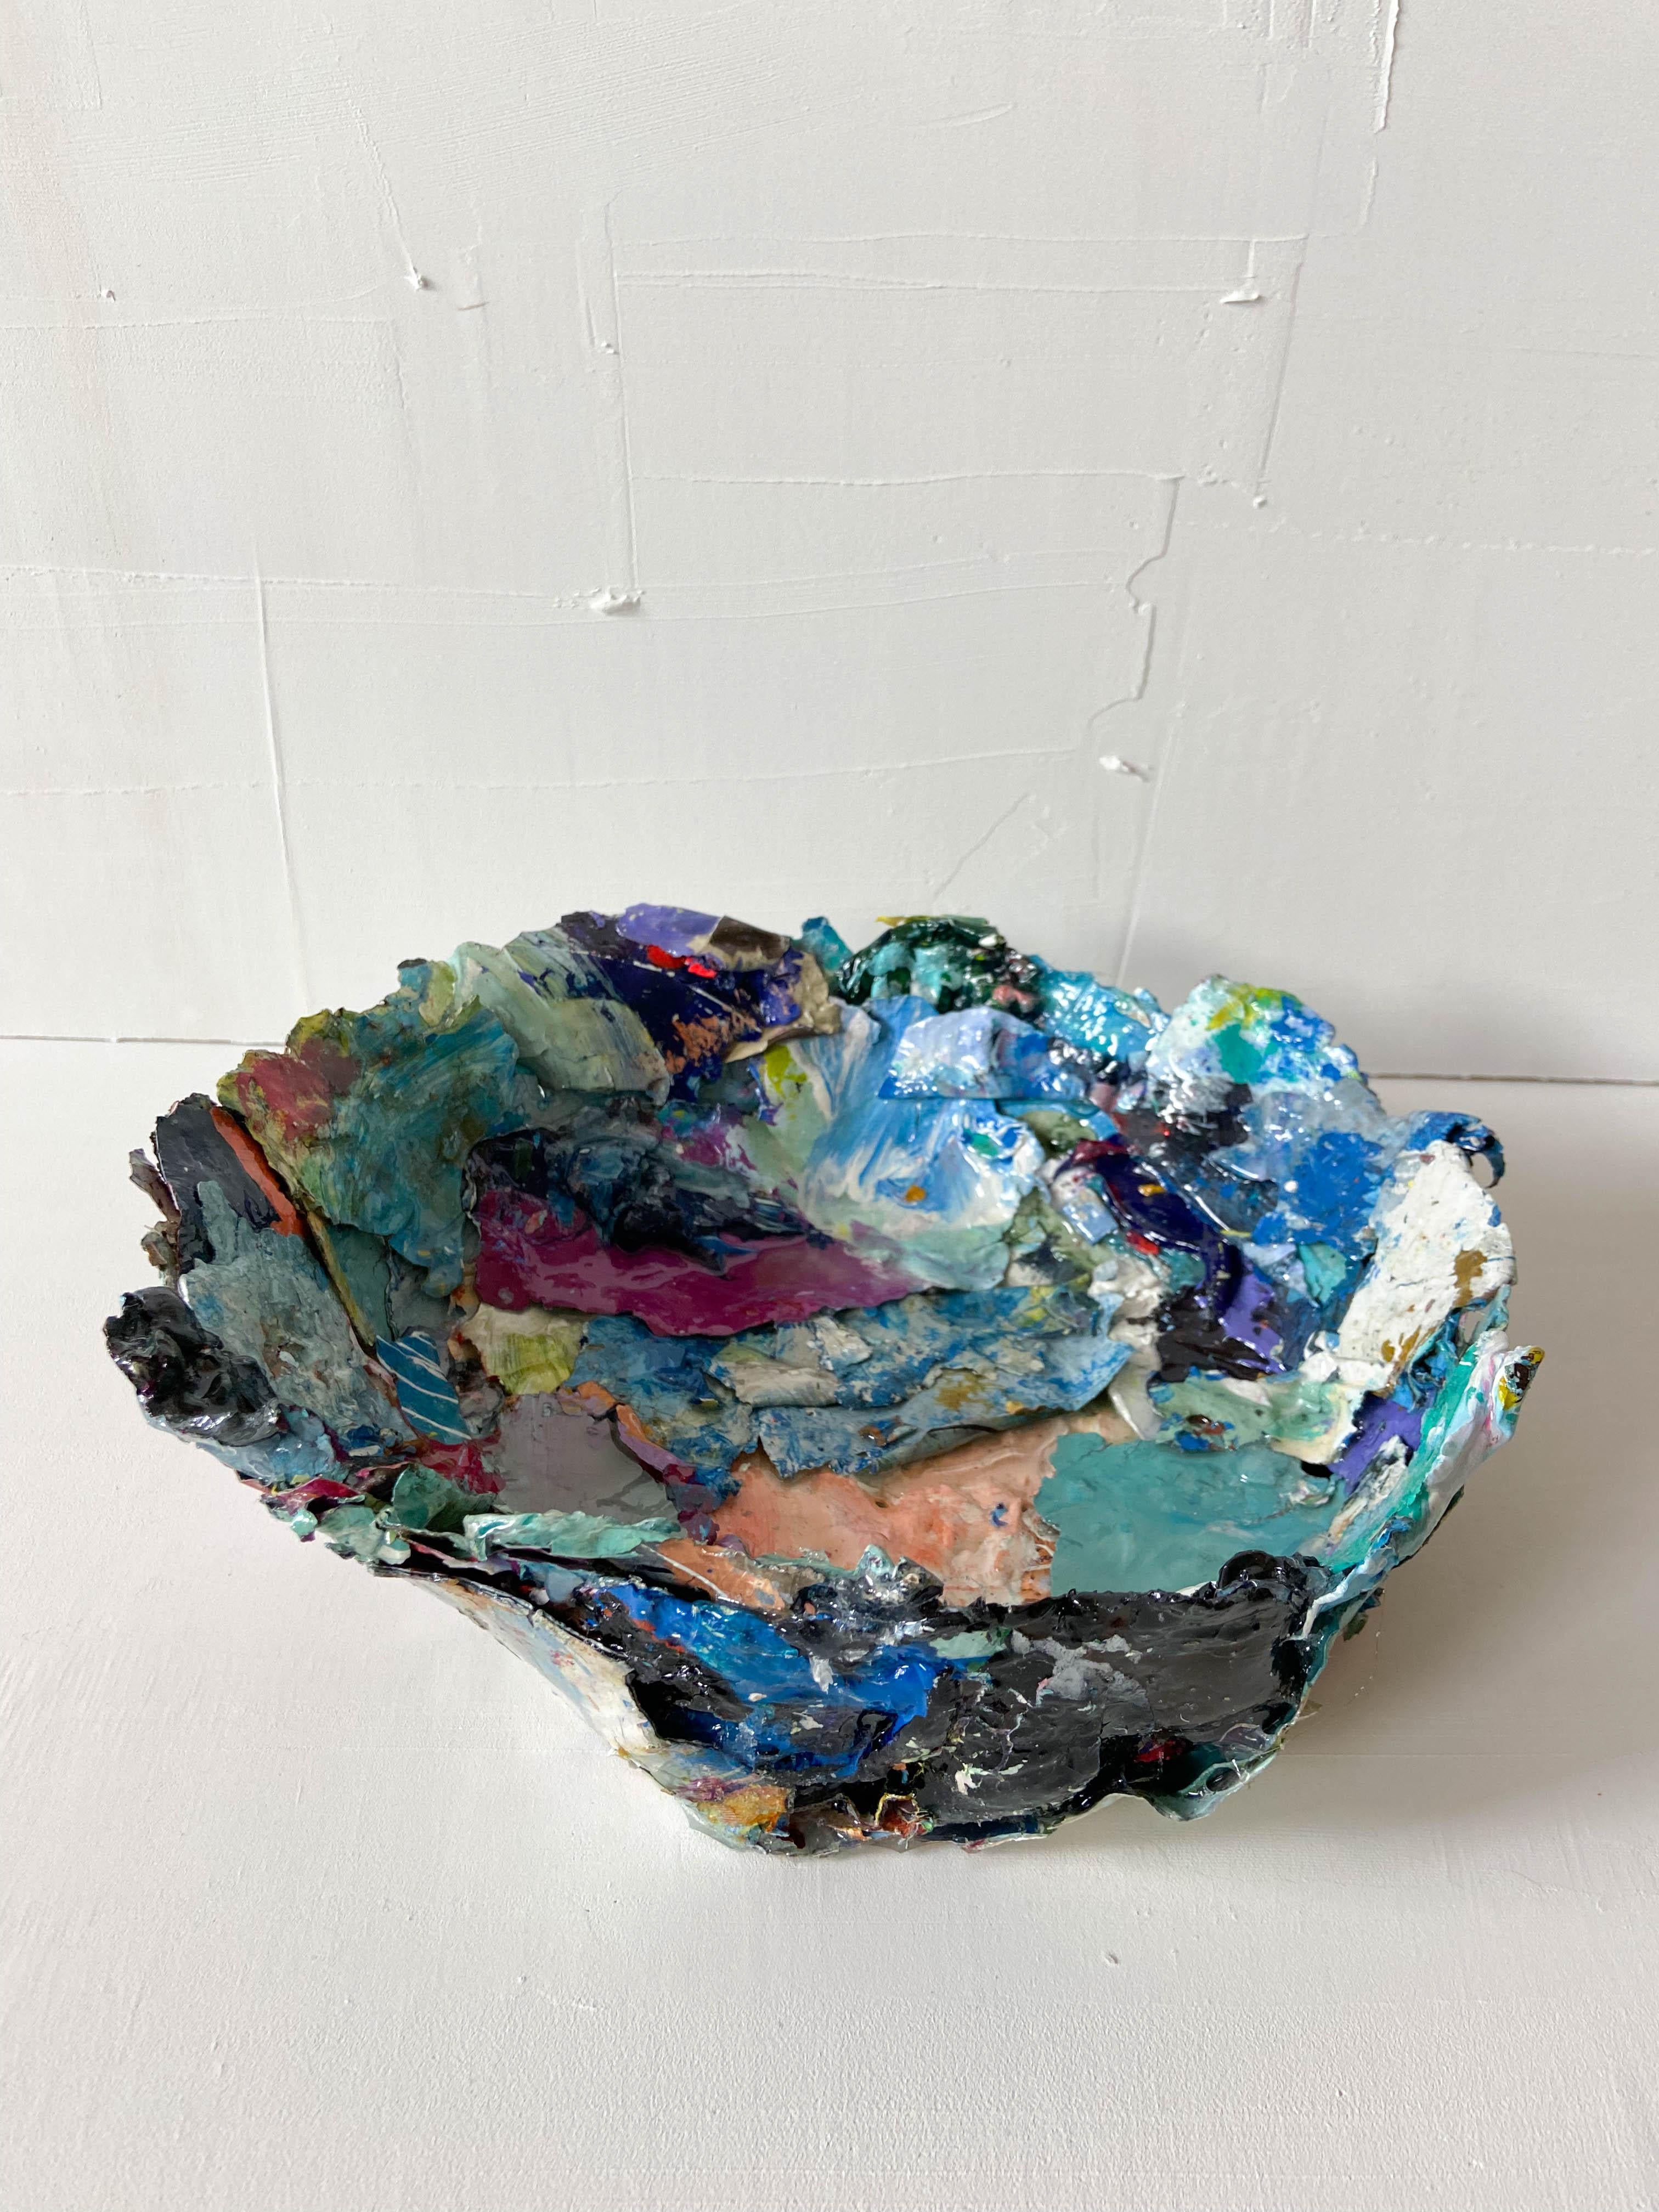 Catie Radney Abstract Sculpture - Large Residual Worlds Bowl Sculpture